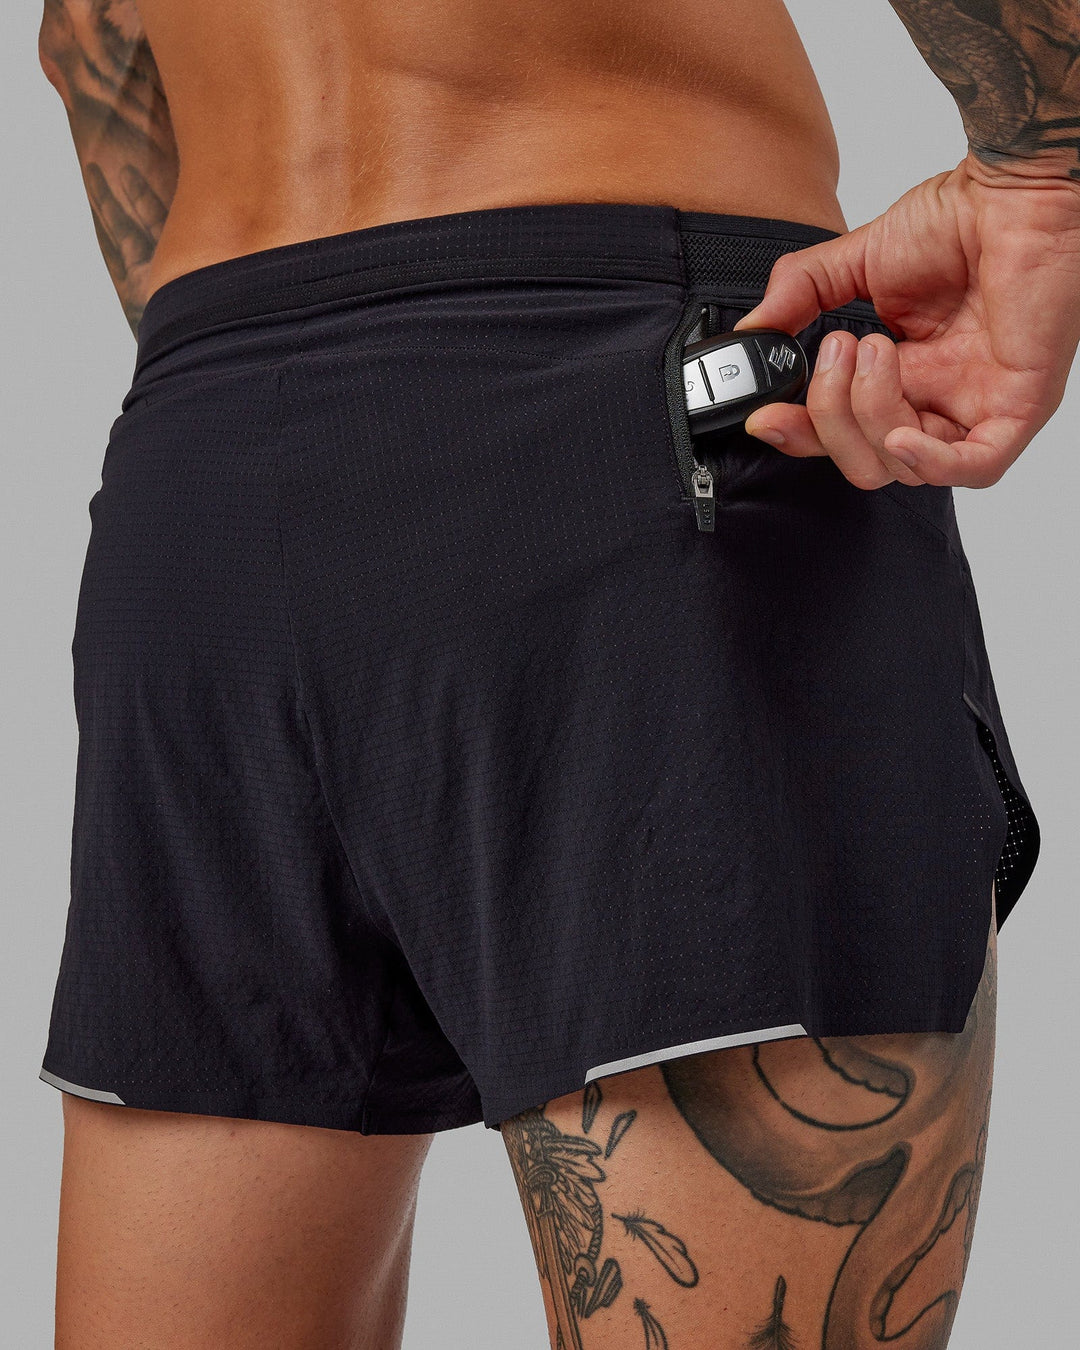 Race Day 3 Lined Running Shorts - Black